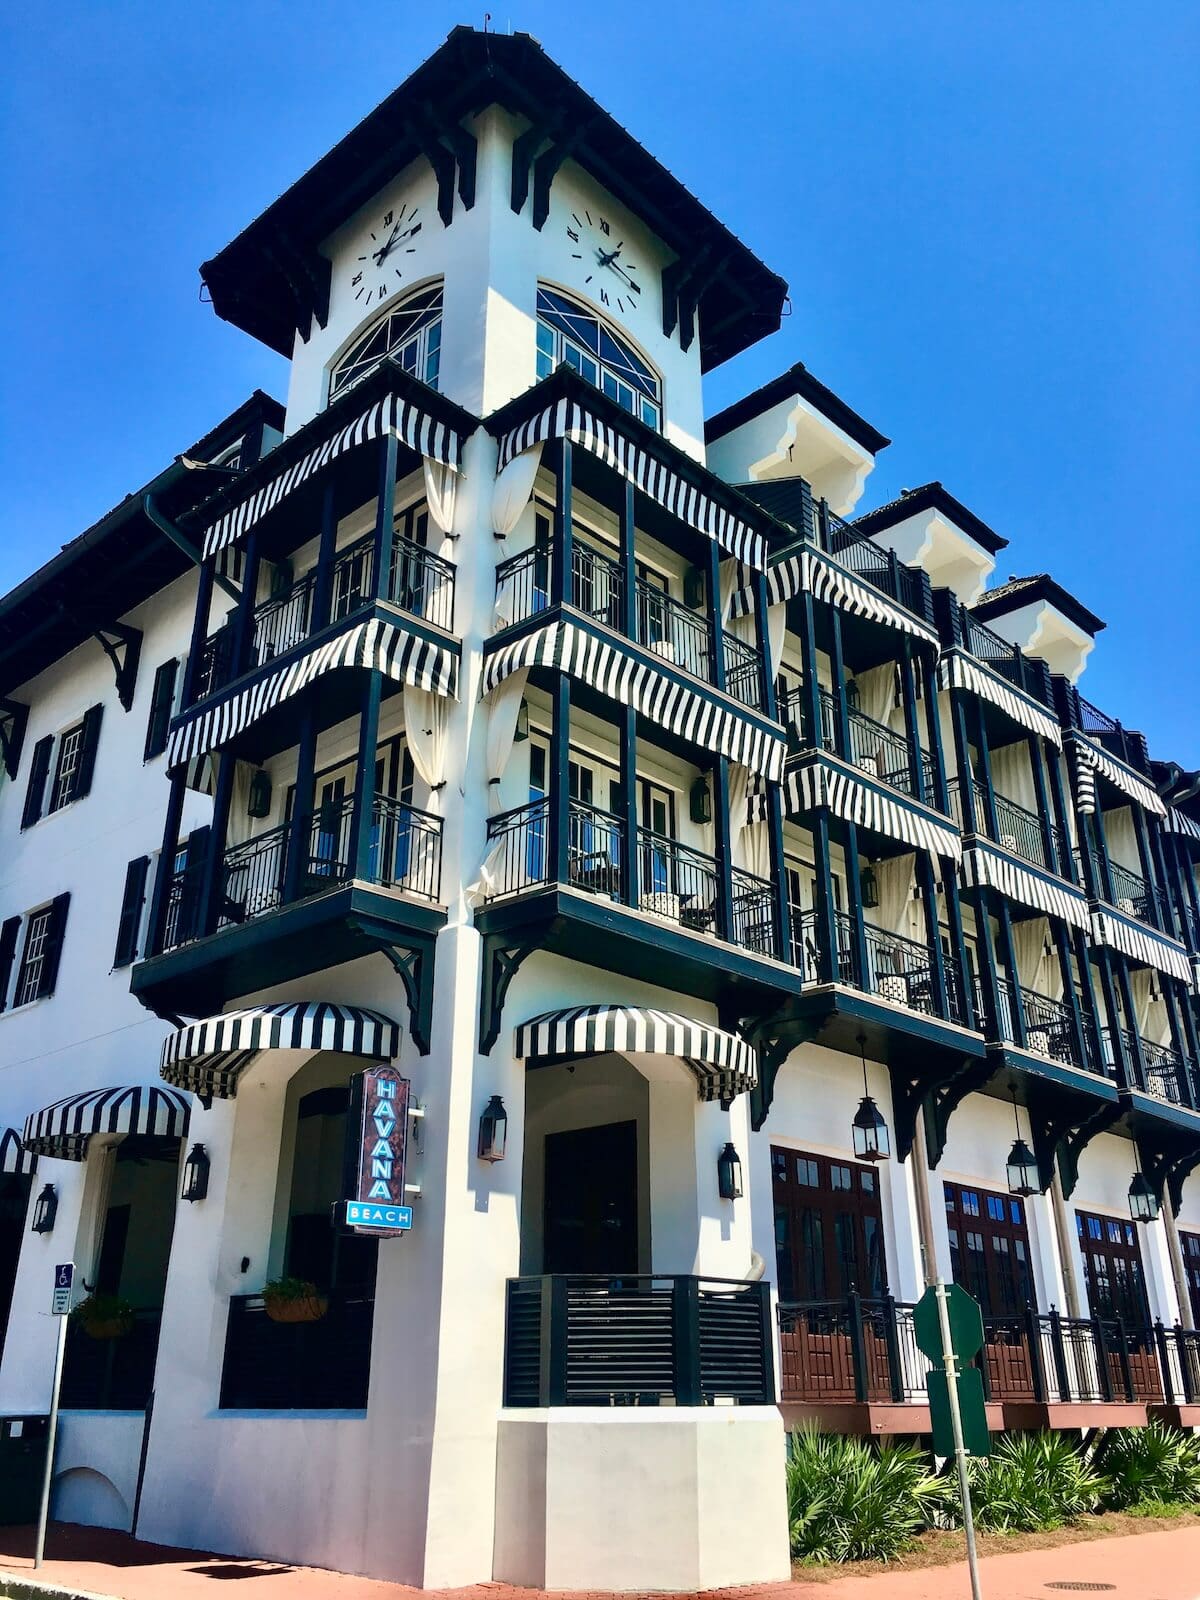 The pearl hotel exterior at rosemary beach